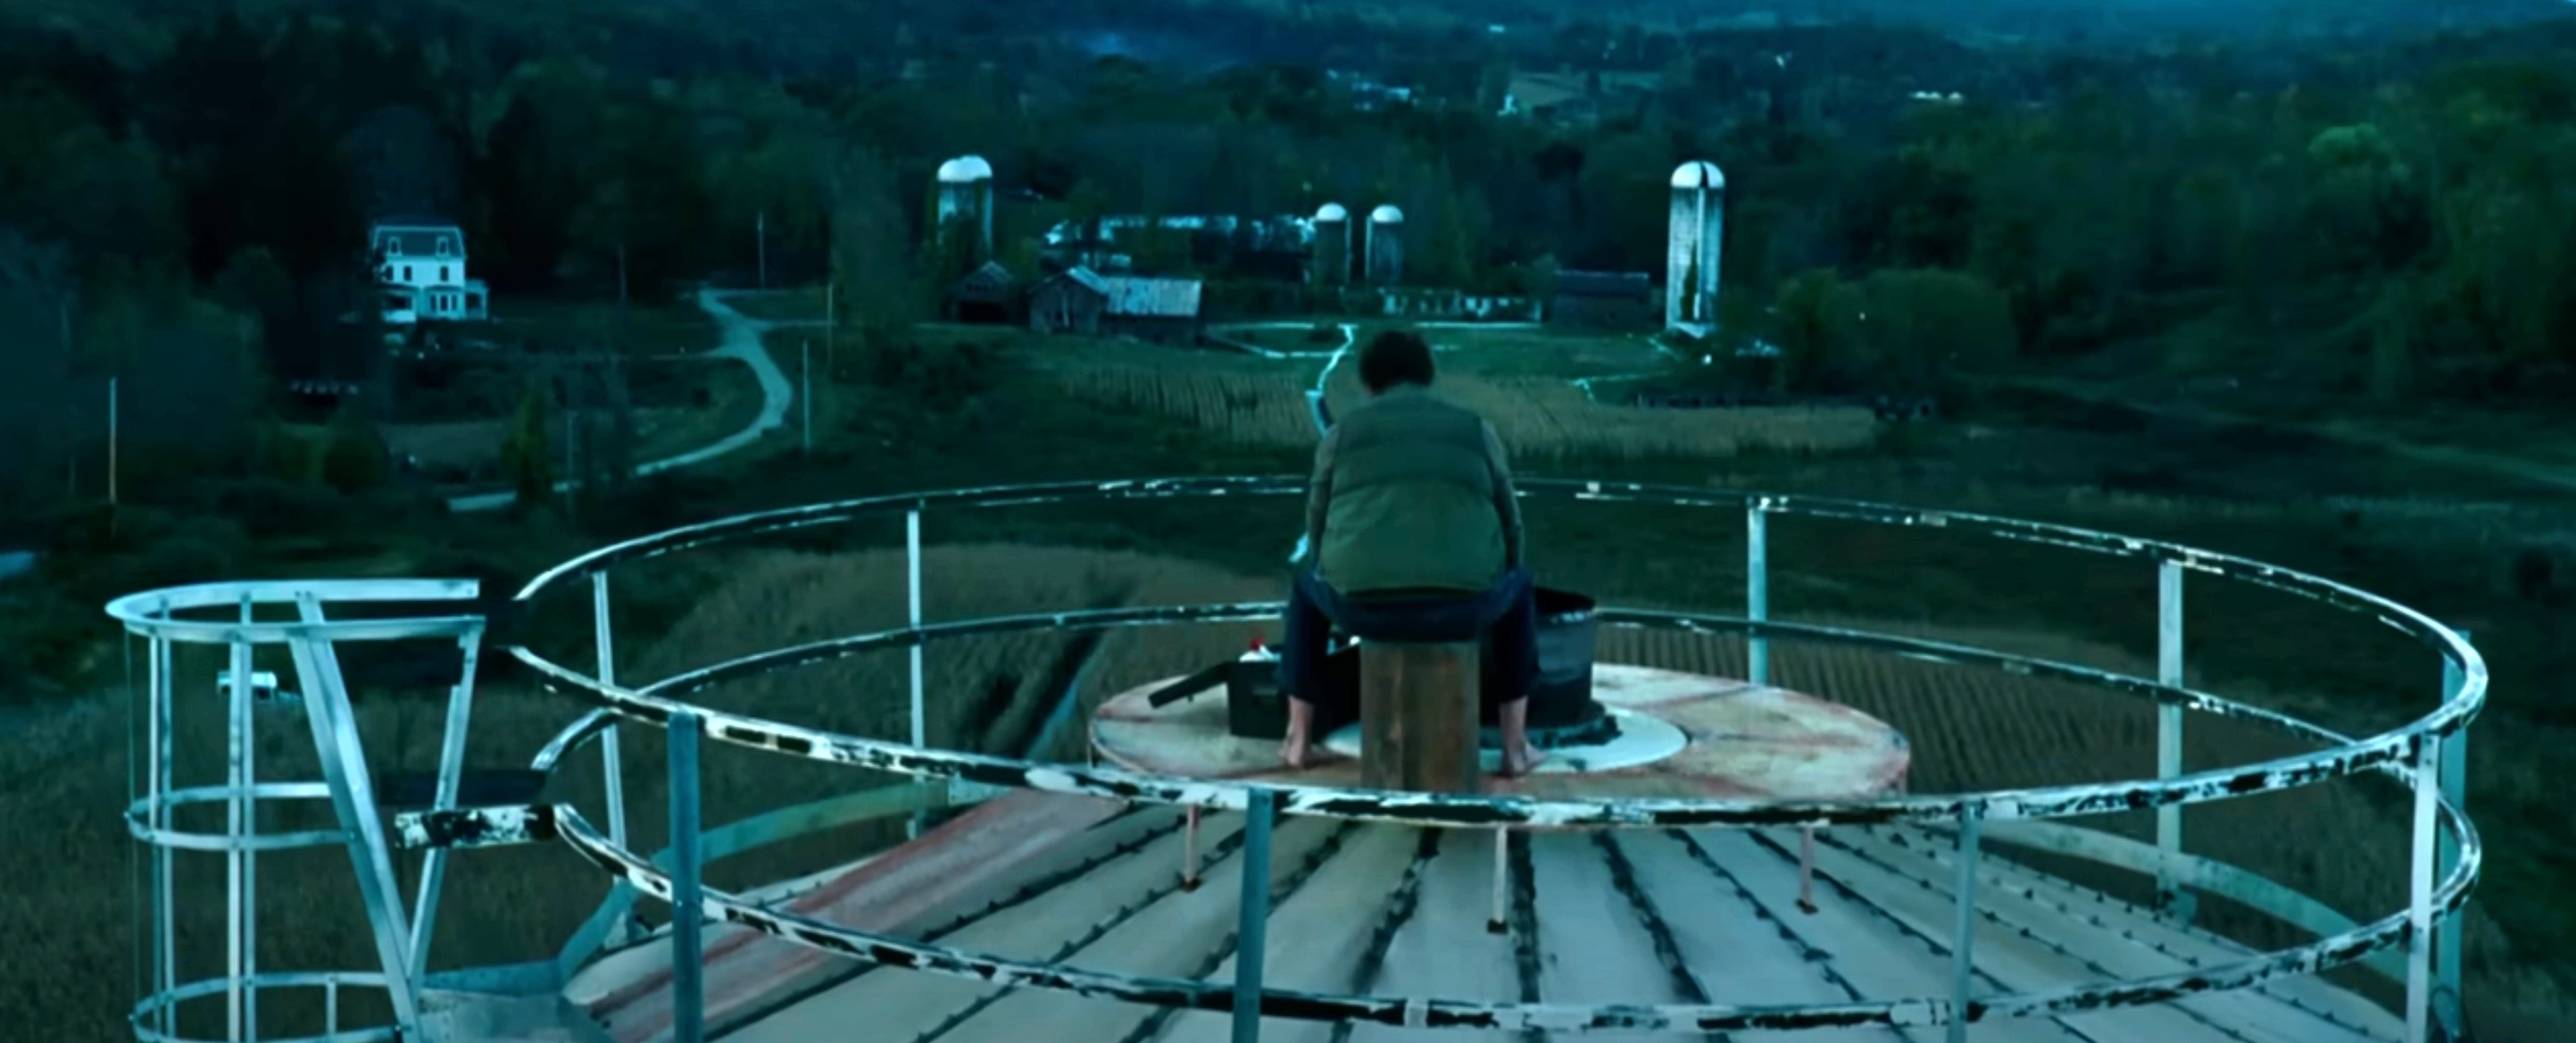 Lee Abbott sitting alone on top of a large circular structure in a rural setting at dusk